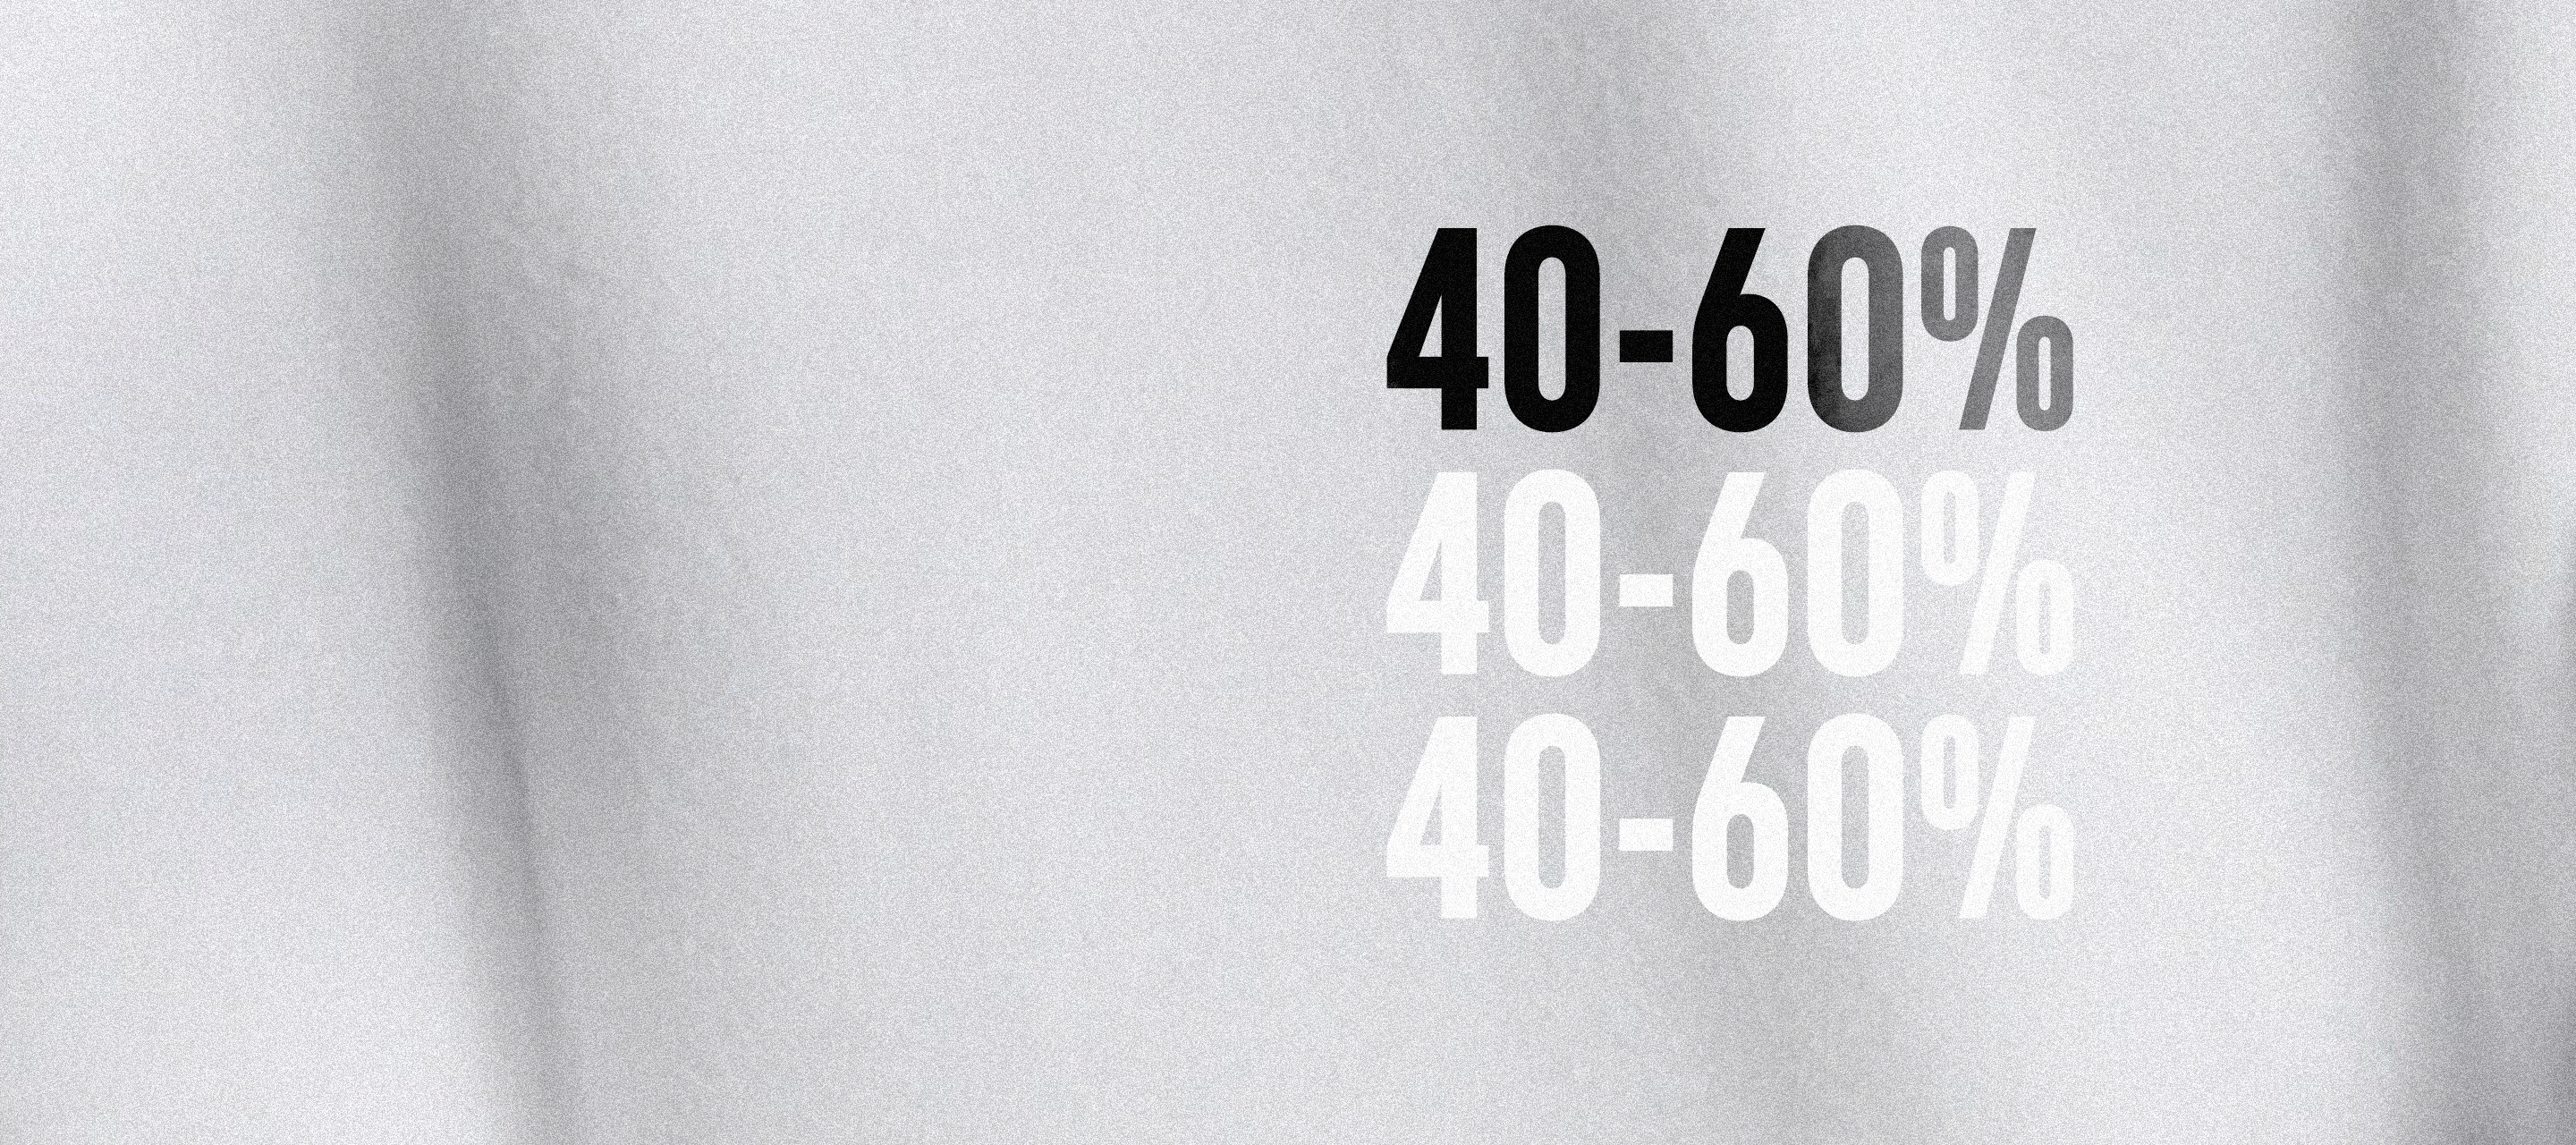 adidas-grey-background-outlet-percentages